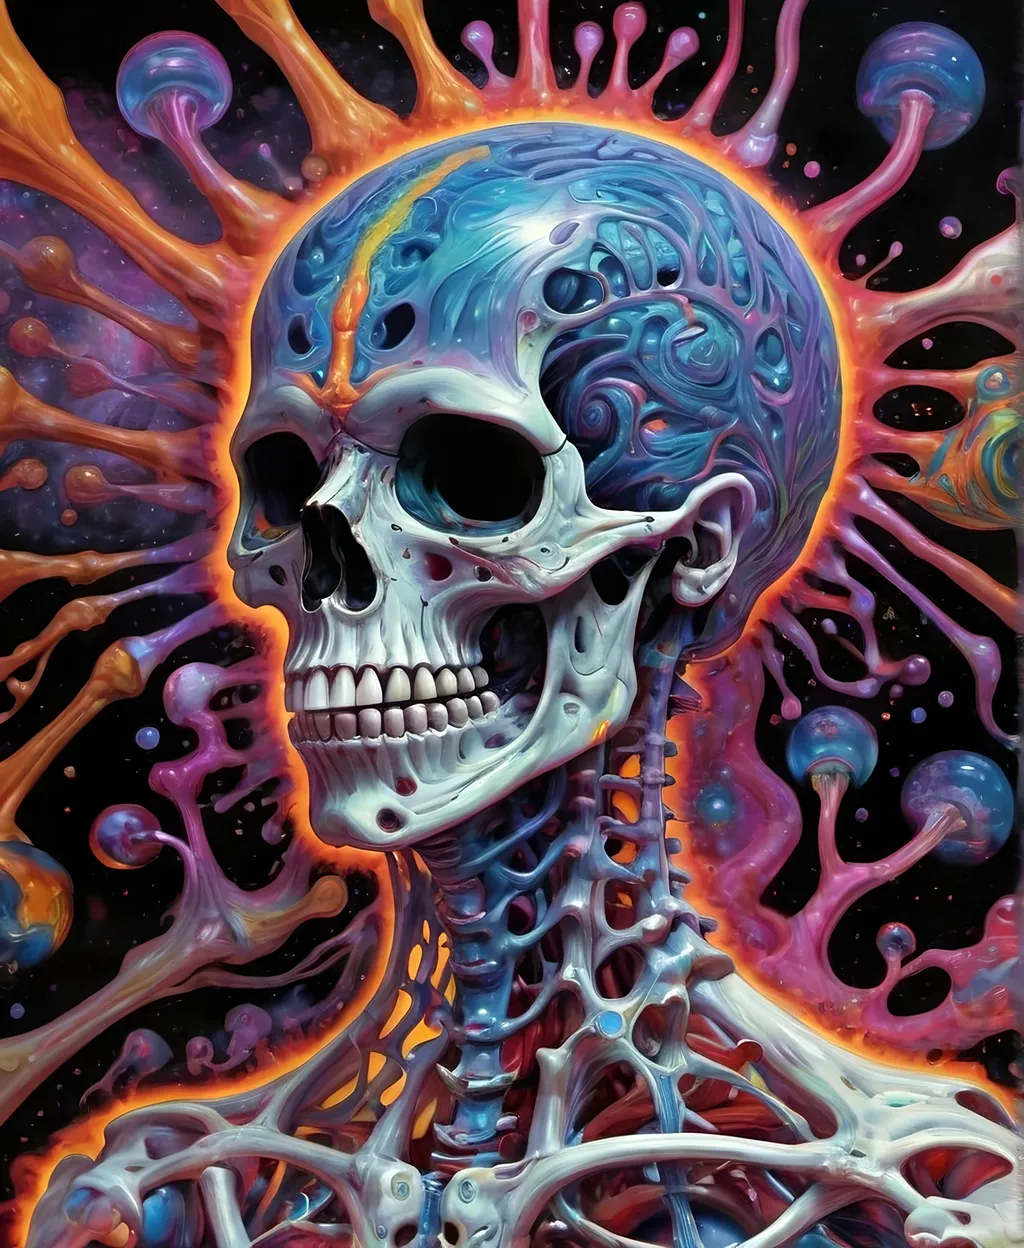 Prompt: Psychedelic hallucination, human being/body melting psychedelicly - skeleton, muscular system, muscles, bones, organs, guts melting, oozing, dissolving into fractals. 9of reality melting, ego death, melty, melting, drippy, drips dripping, Ooze, oozing, Alex grey, fractals, visionary, psychedelic, trippy, weird